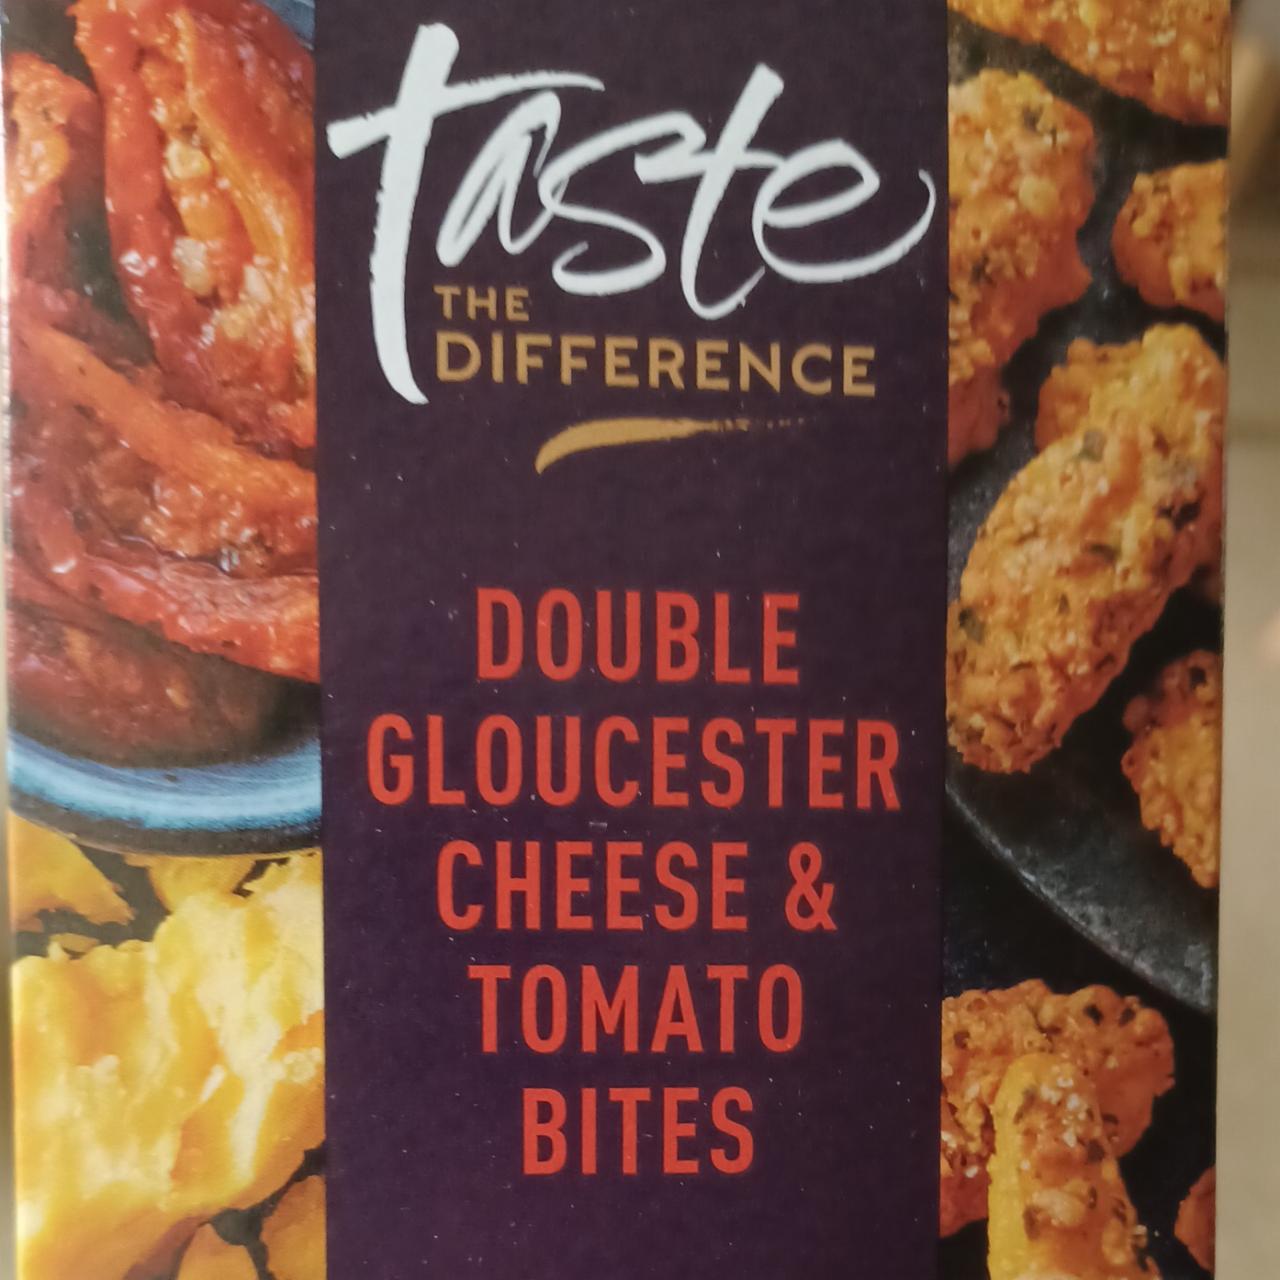 Fotografie - Double Gloucester Cheese & Tomato Bites by Taste the Difference